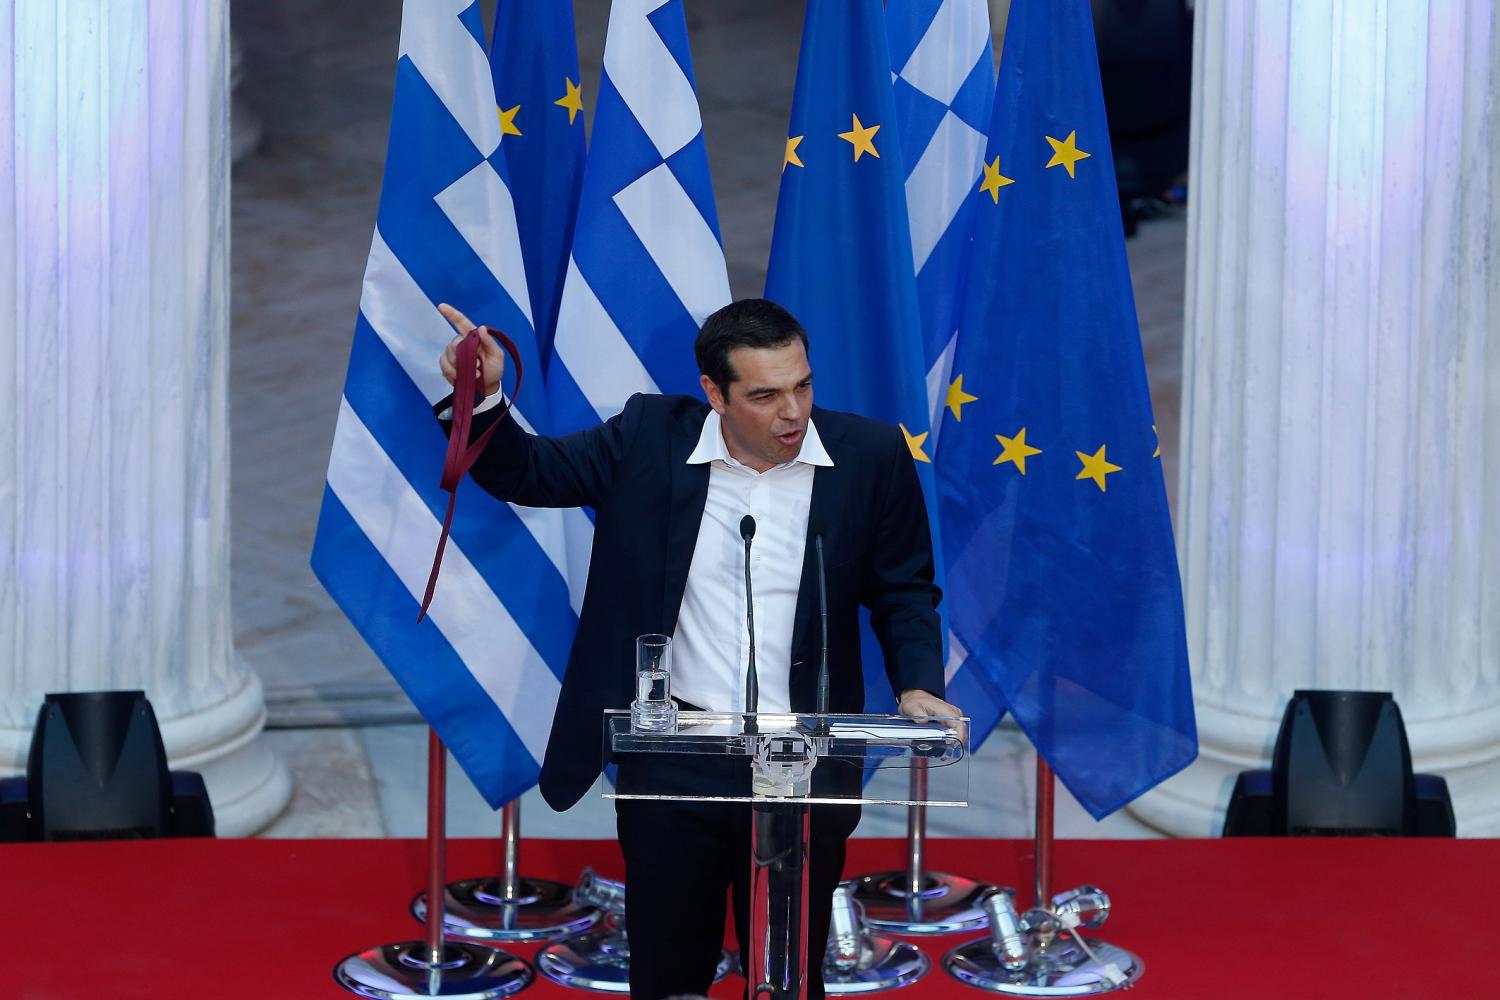 Greek Prime Minister Alexis Tsipras holds his tie as he speaks at the parliamentary group of Syriza and Independent Greeks in Athens, Greece, June 22, 2018.REUTERS/Costas Baltas - RC1866D1E820